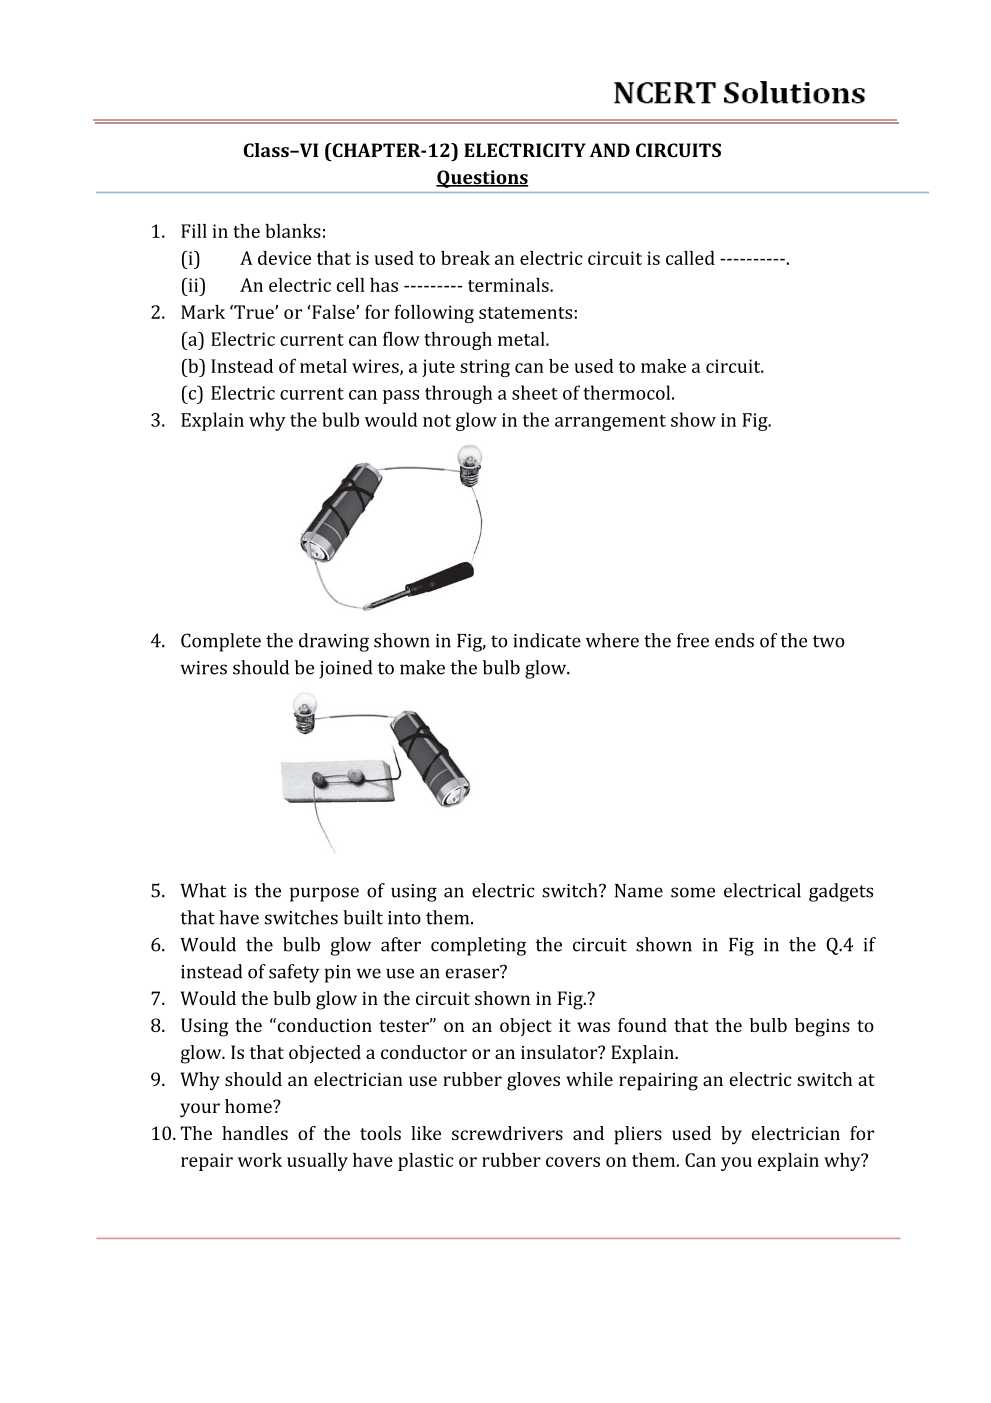 NCERT Solutions For Class 6 Science Chapter 12